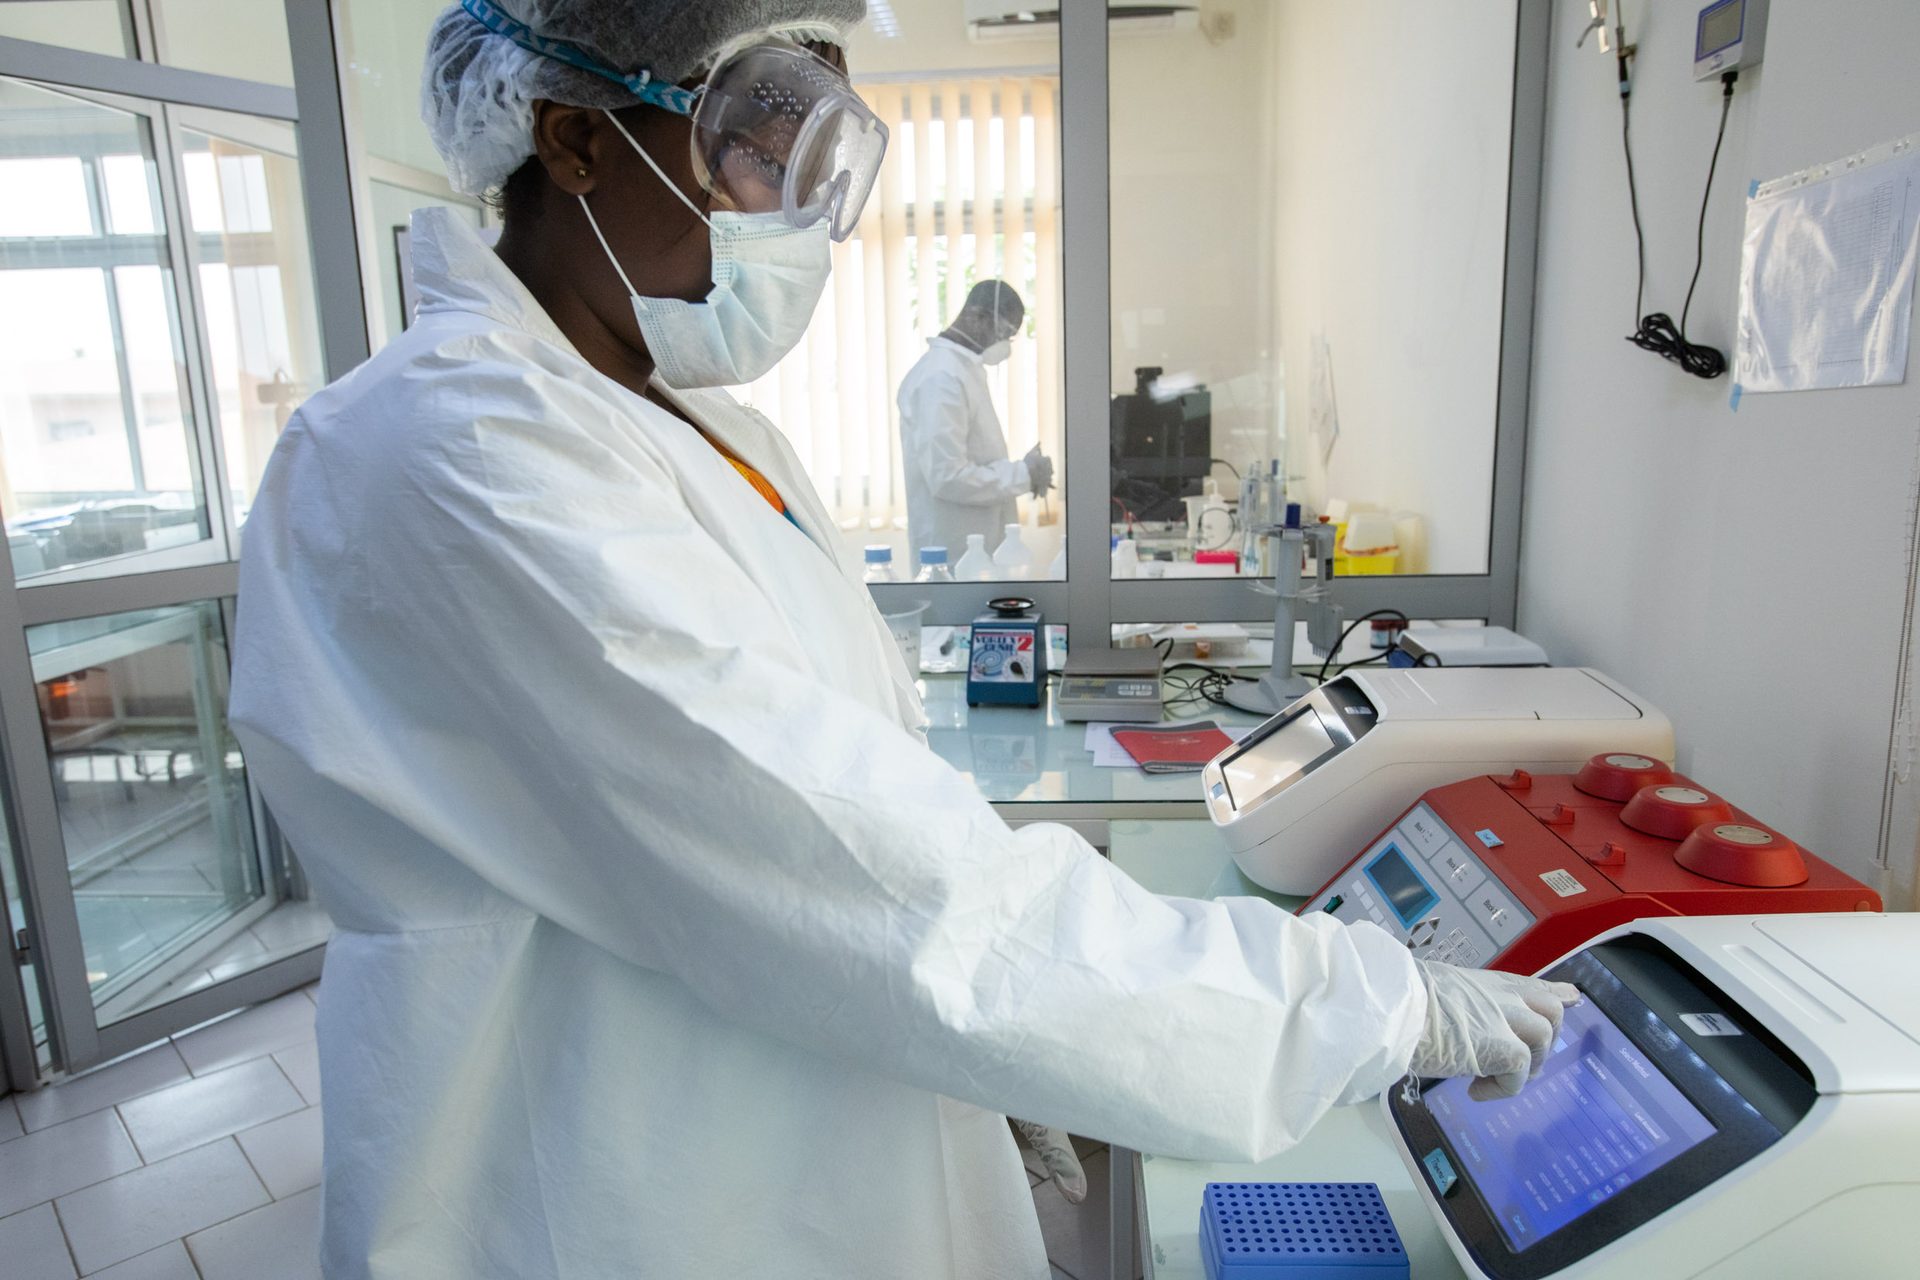 In Cameroon, a lab worker processes samples collected in wildlife to better understand zoonoses such as Ebola.